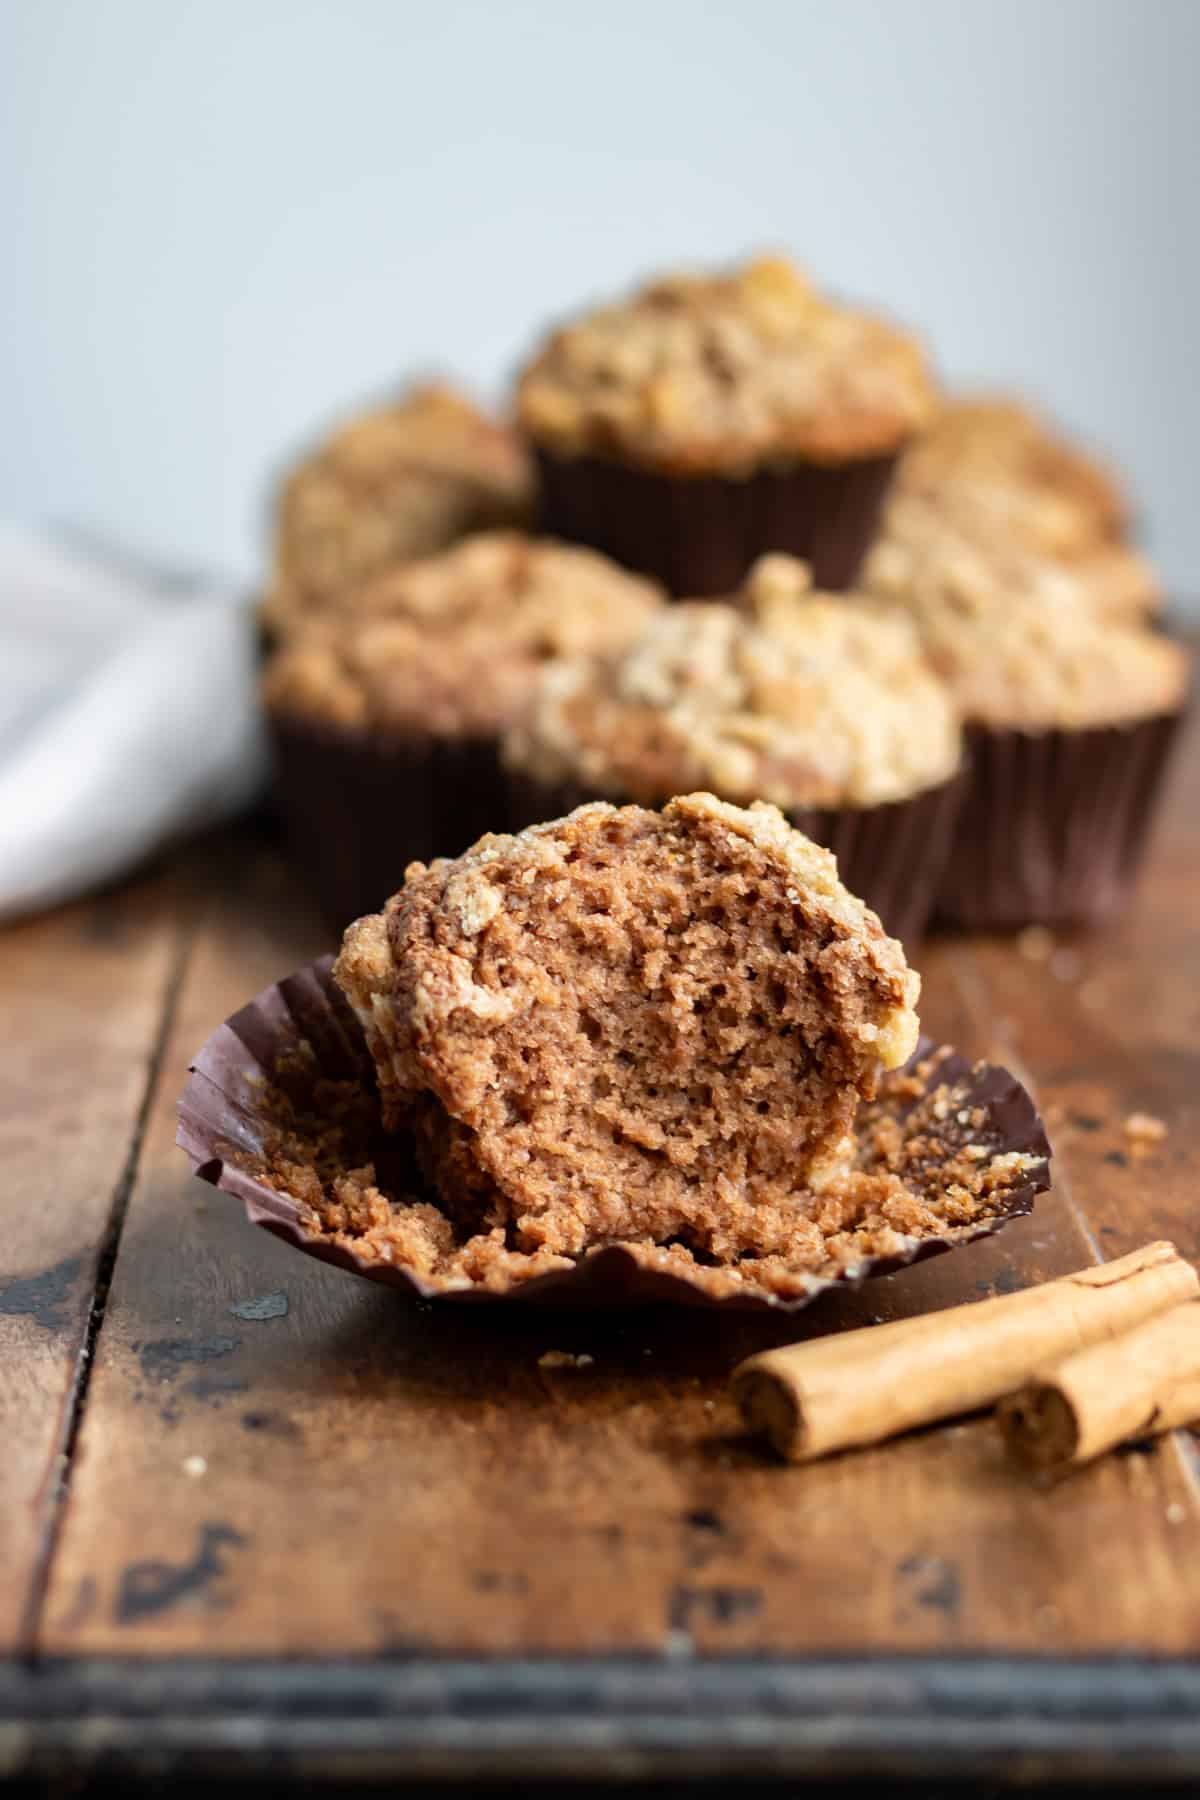 A wooden table with a cinnamon muffin with a bite out of it.